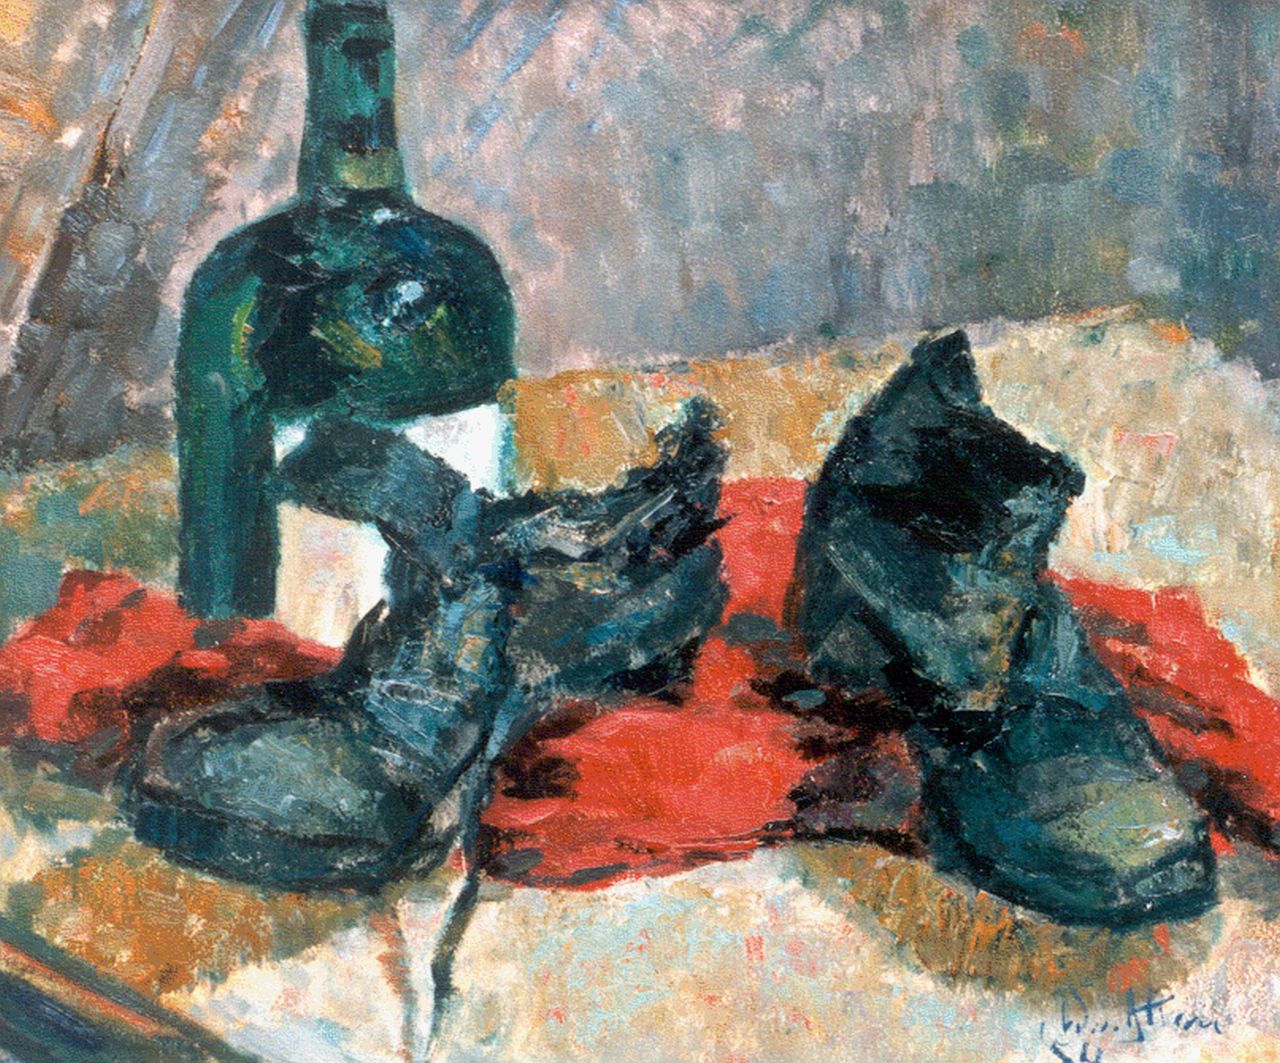 Wim van Aken | A still life with old shoes, oil on canvas, 10.0 x 10.0 cm